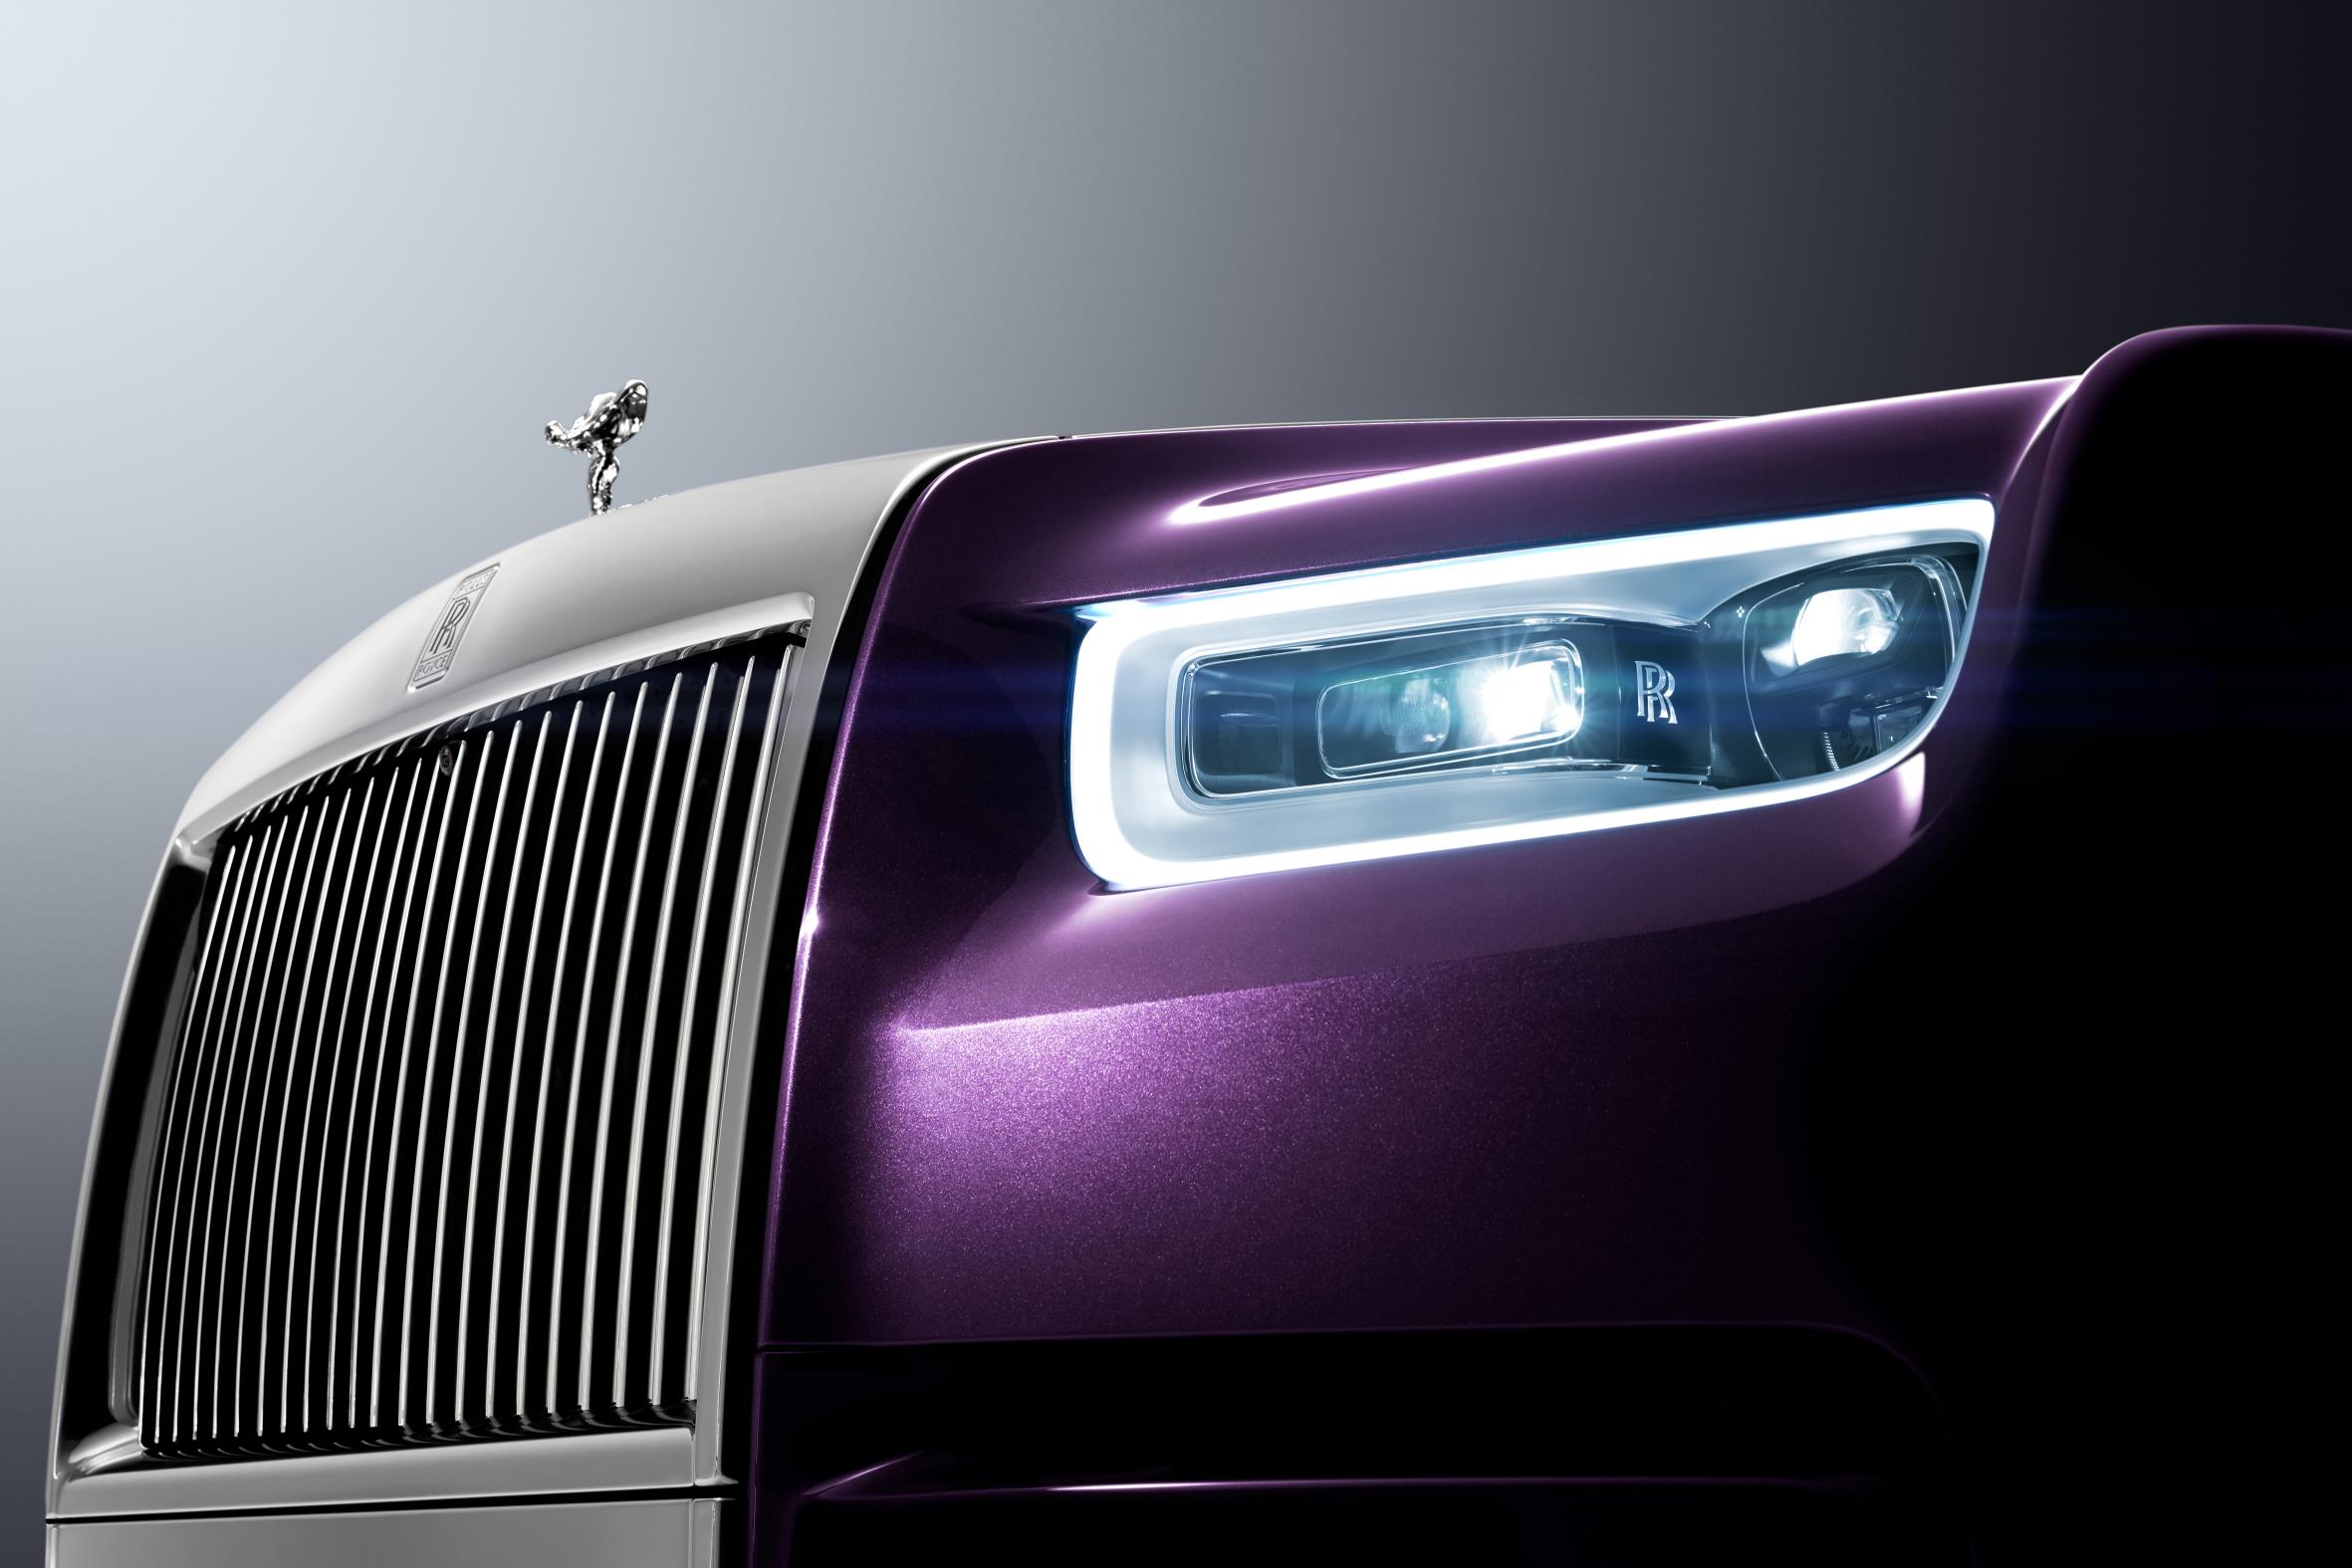 2018 Rolls-Royce Phantom VIII Is The ‘Most Silent’ Car In The World